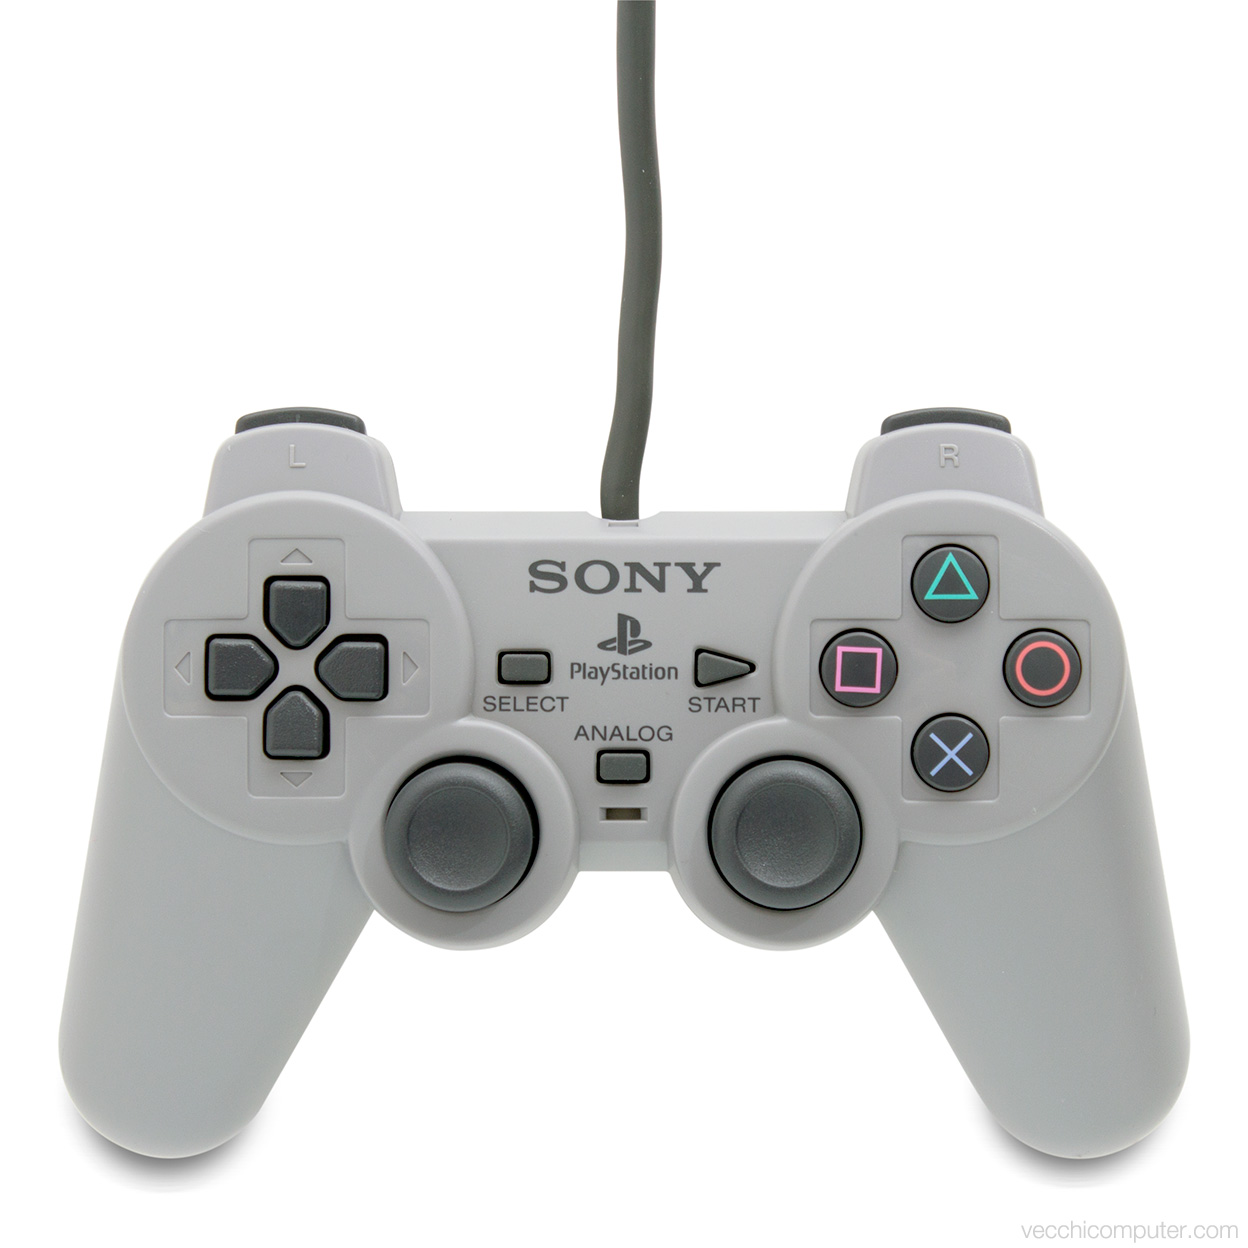 Game stick геймпады. Sony Dualshock ps1. Ps1 Dual Analog. Ps1 Dual Analog Controller. Sony ps2 Gamepad.